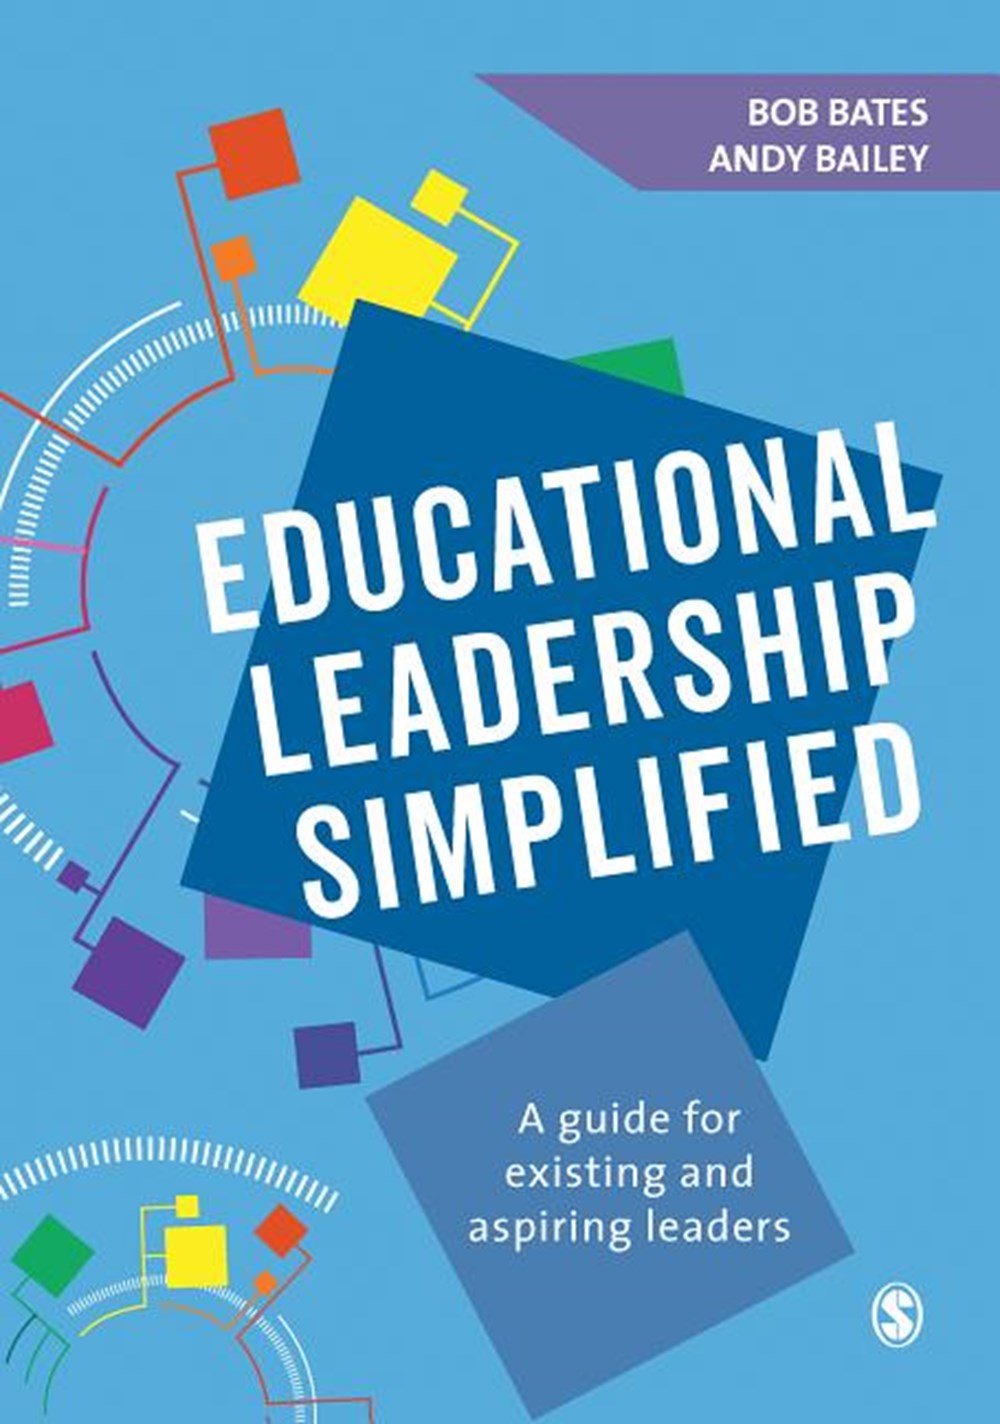 Educational Leadership Simplified A guide for existing and aspiring leaders